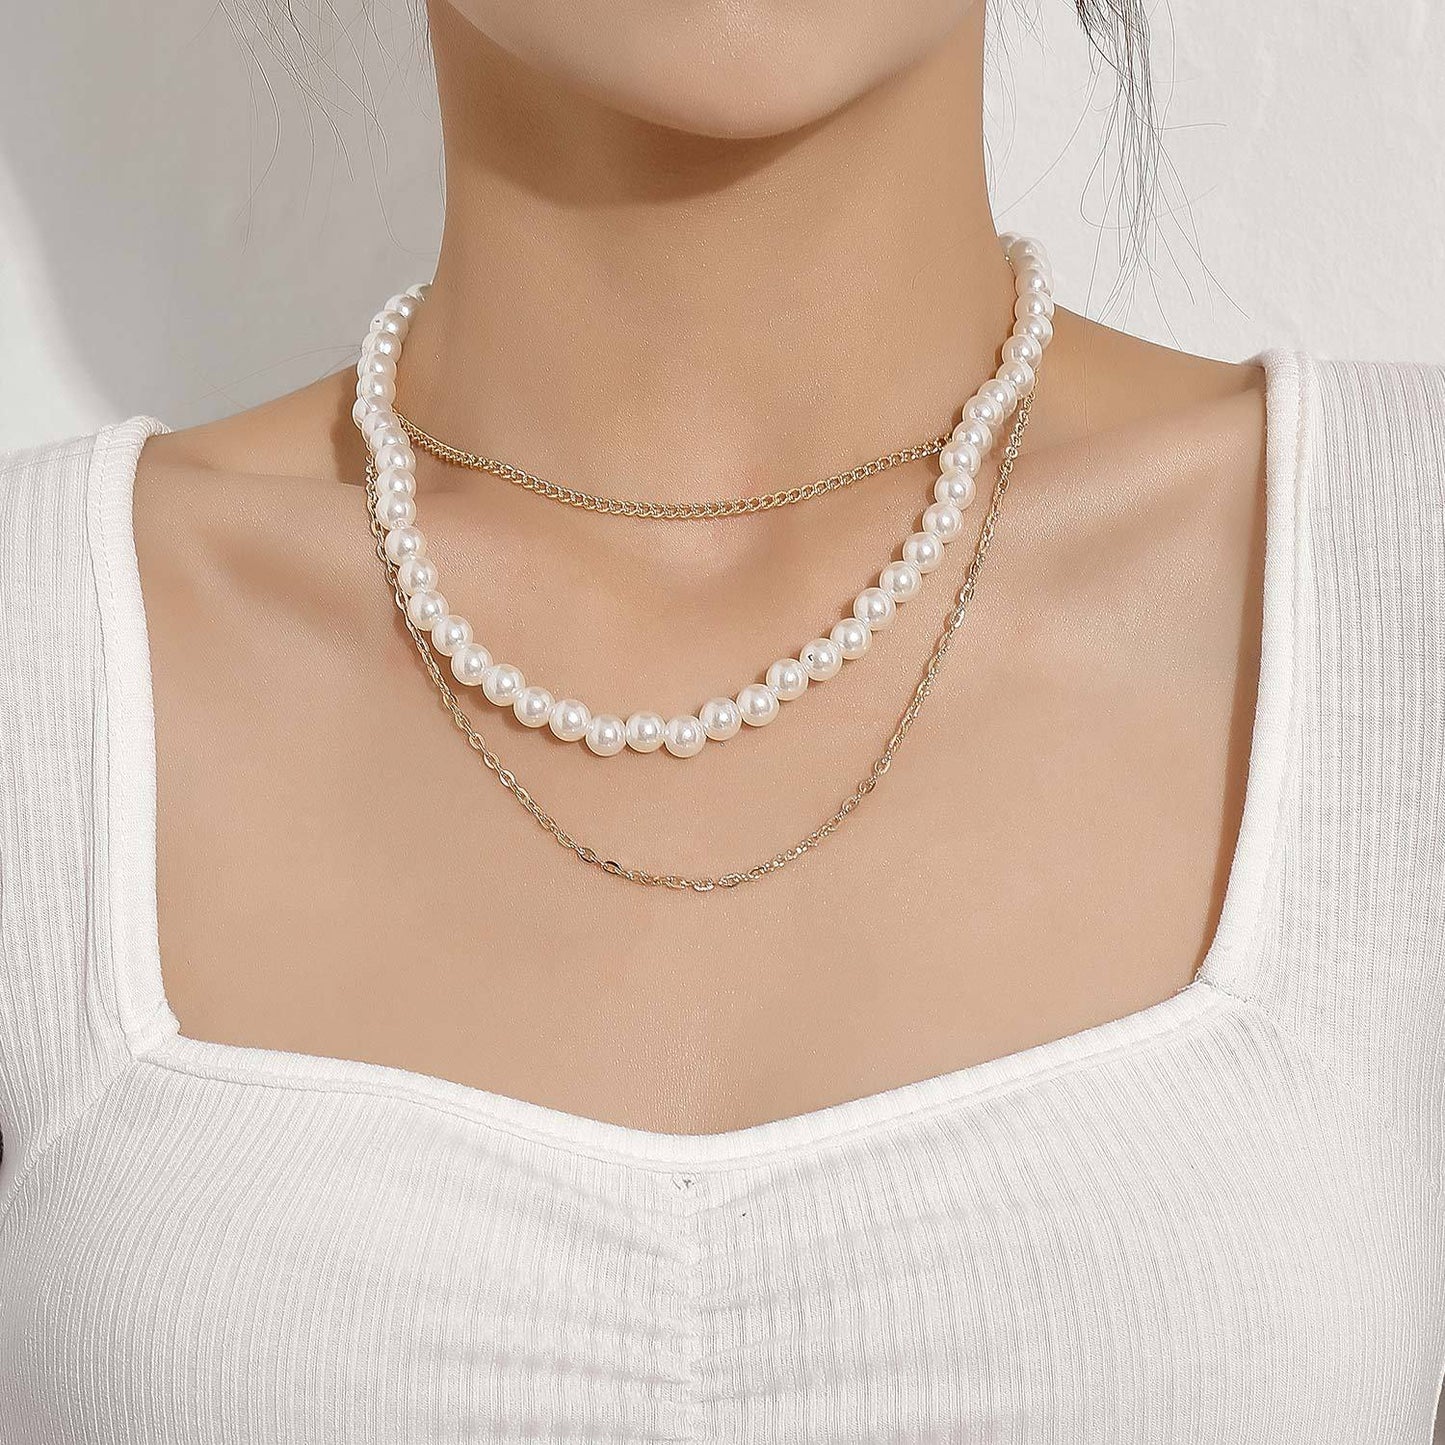 Vintage Style Simple 6MM Pearl Chain Choker Necklace For Women Wedding Love Shell Pendant Necklace Fashion Jewelry Wholesale - LEIDAI